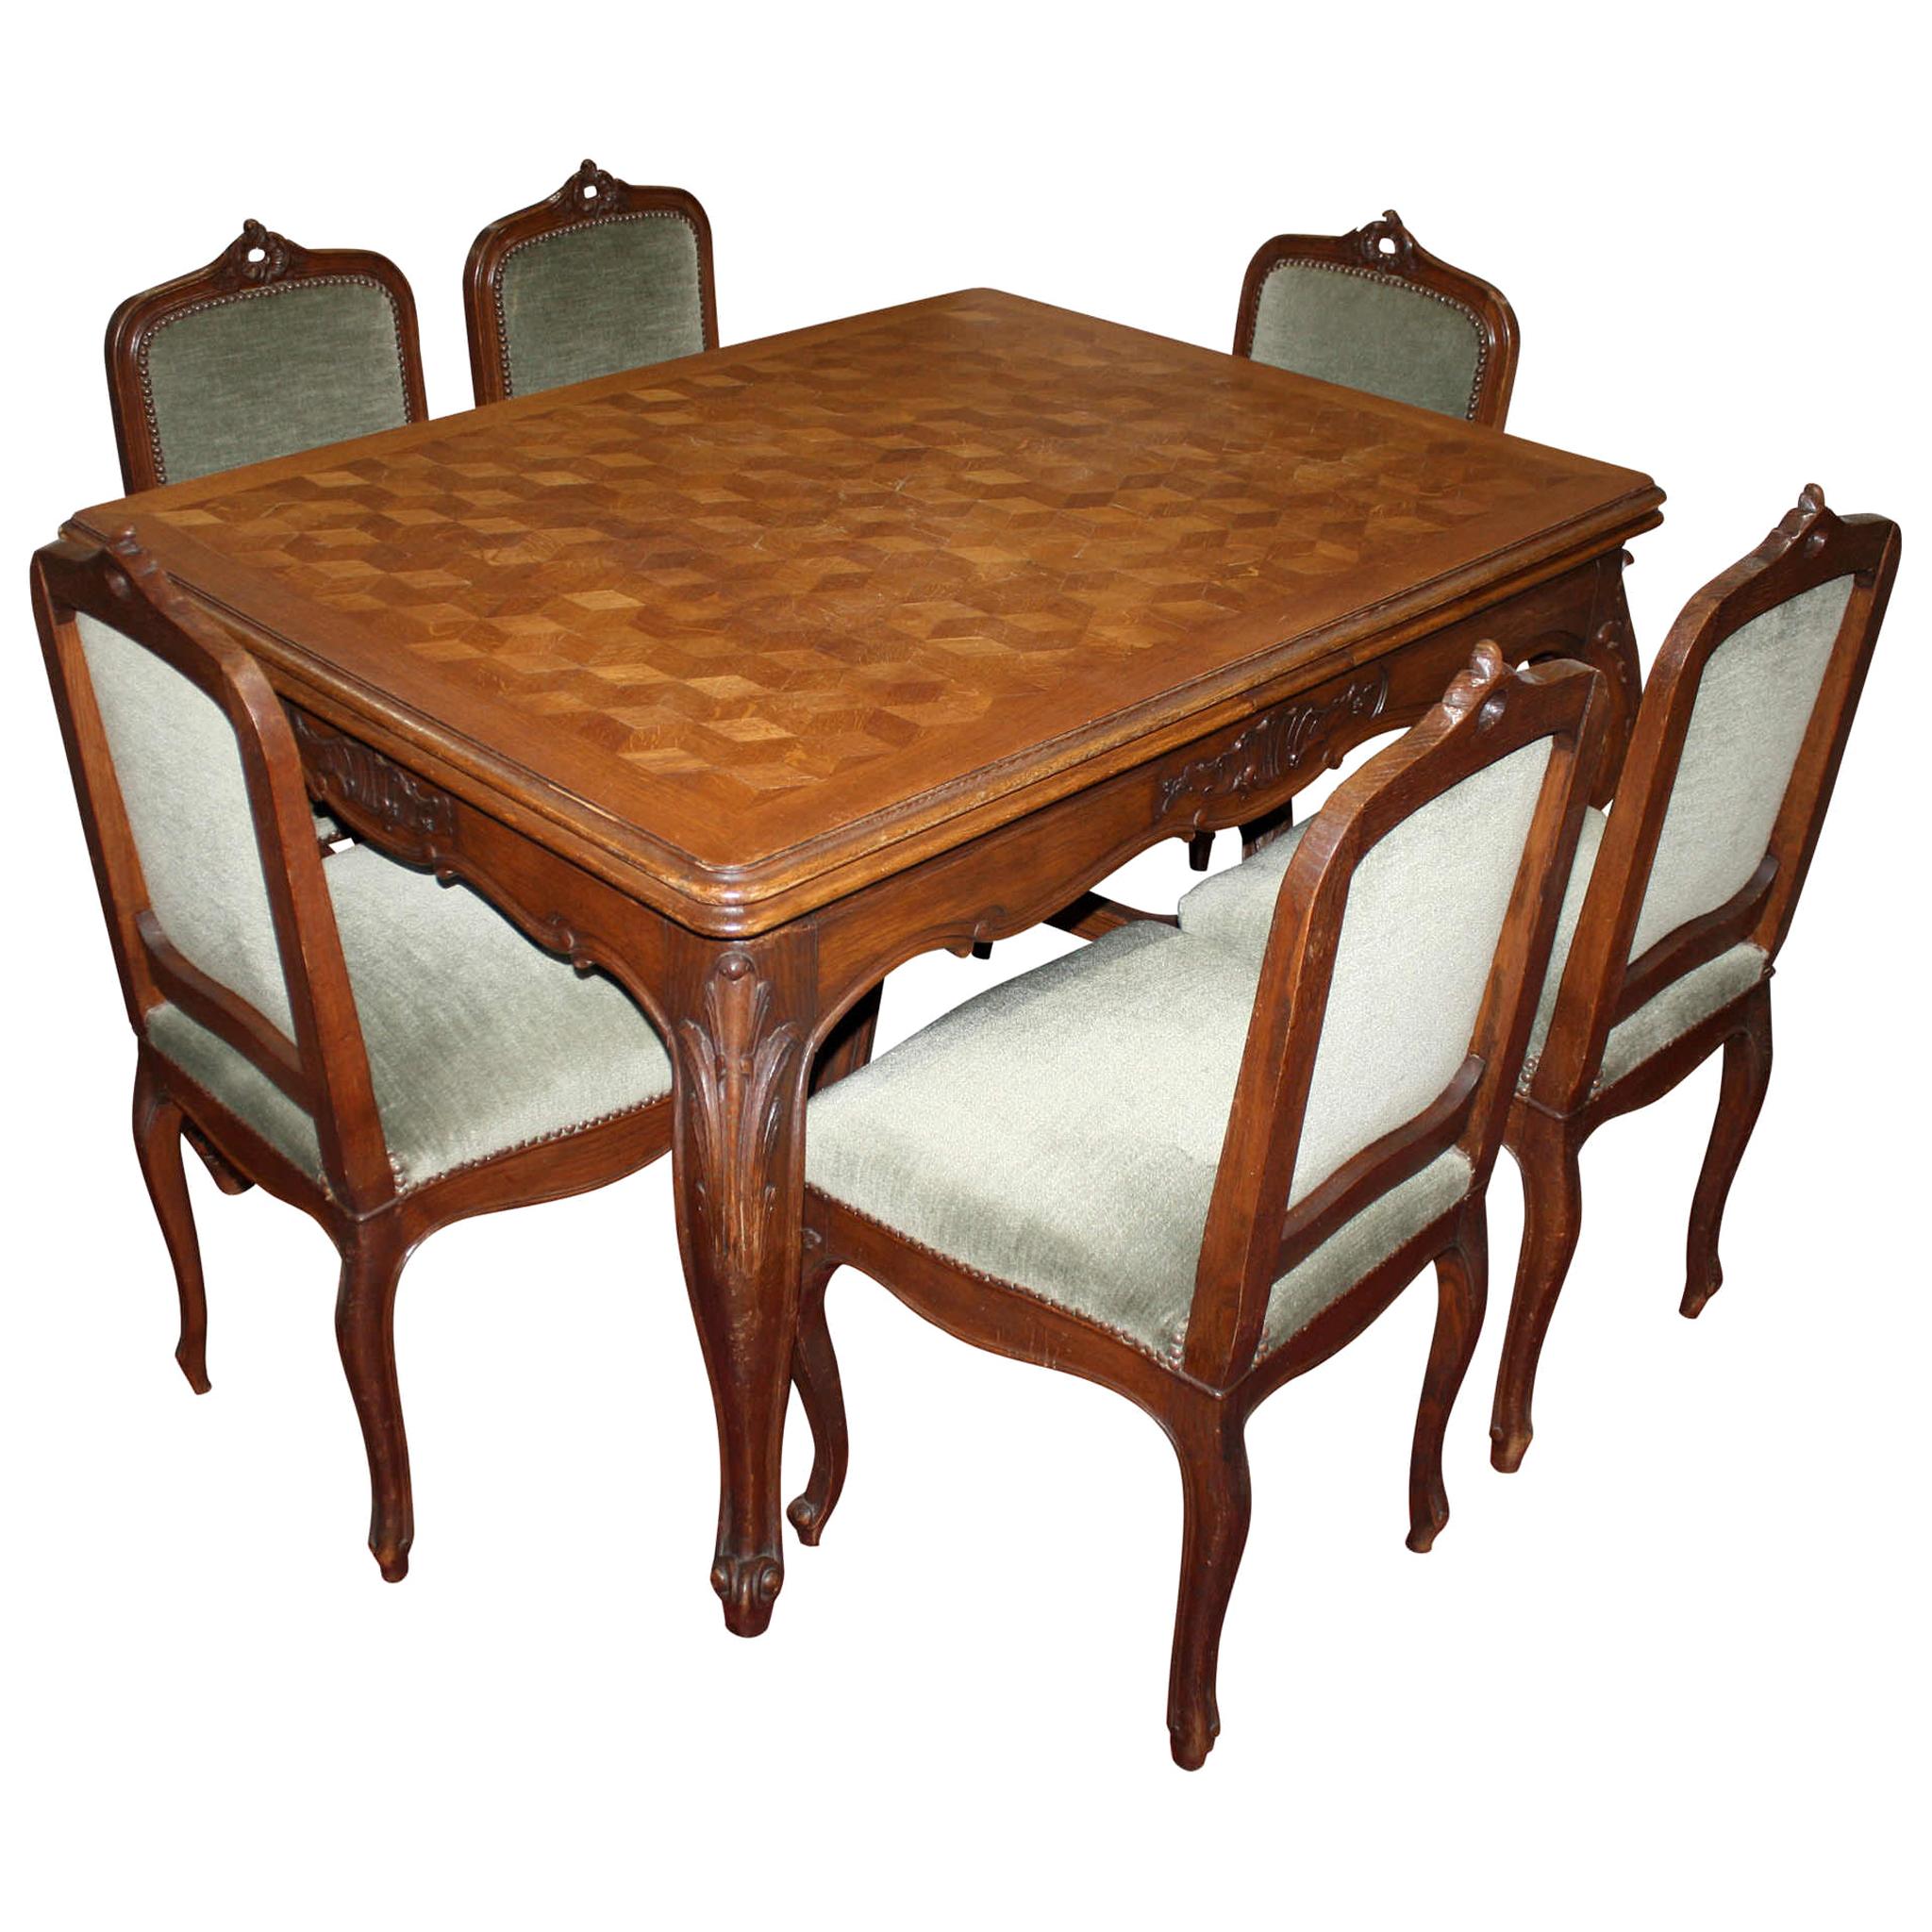 Louis XV Extendable Parquet Dining Table with Six Chairs, circa 1890